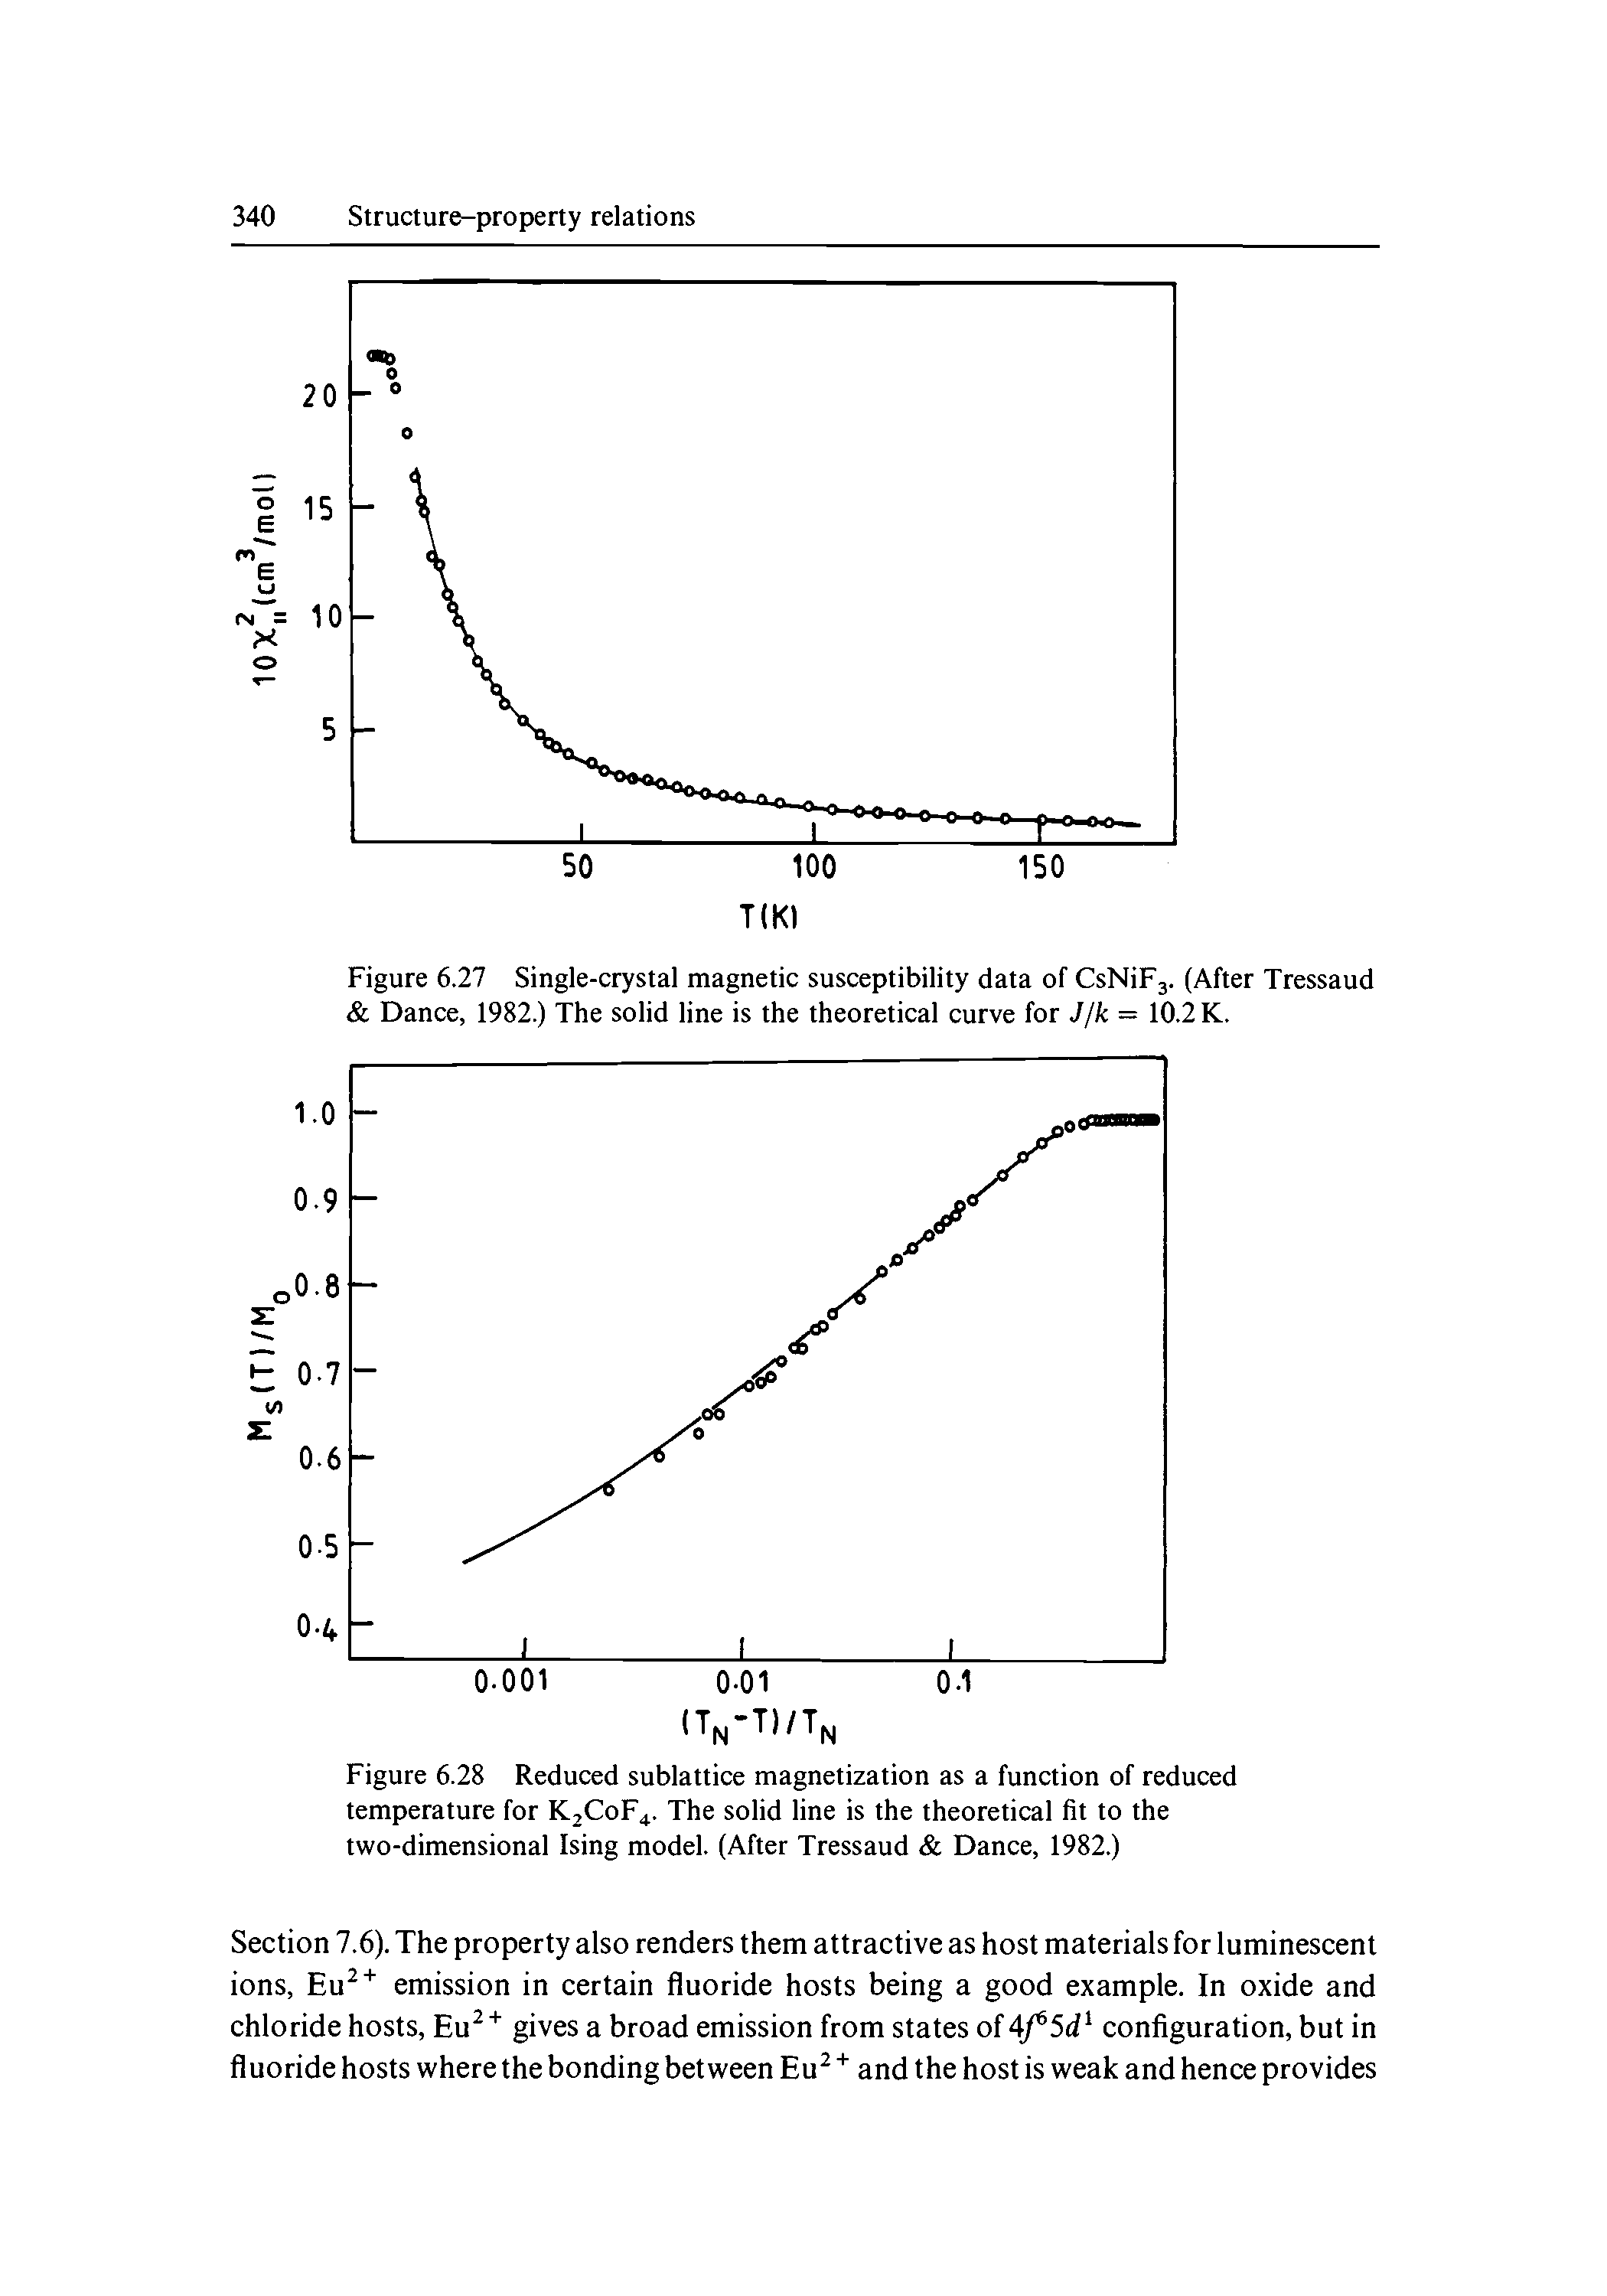 Figure 6.27 Single-crystal magnetic susceptibility data of CsNiFj. (After Tressaud Dance, 1982.) The solid line is the theoretical curve for Jjk = 10.2 K.